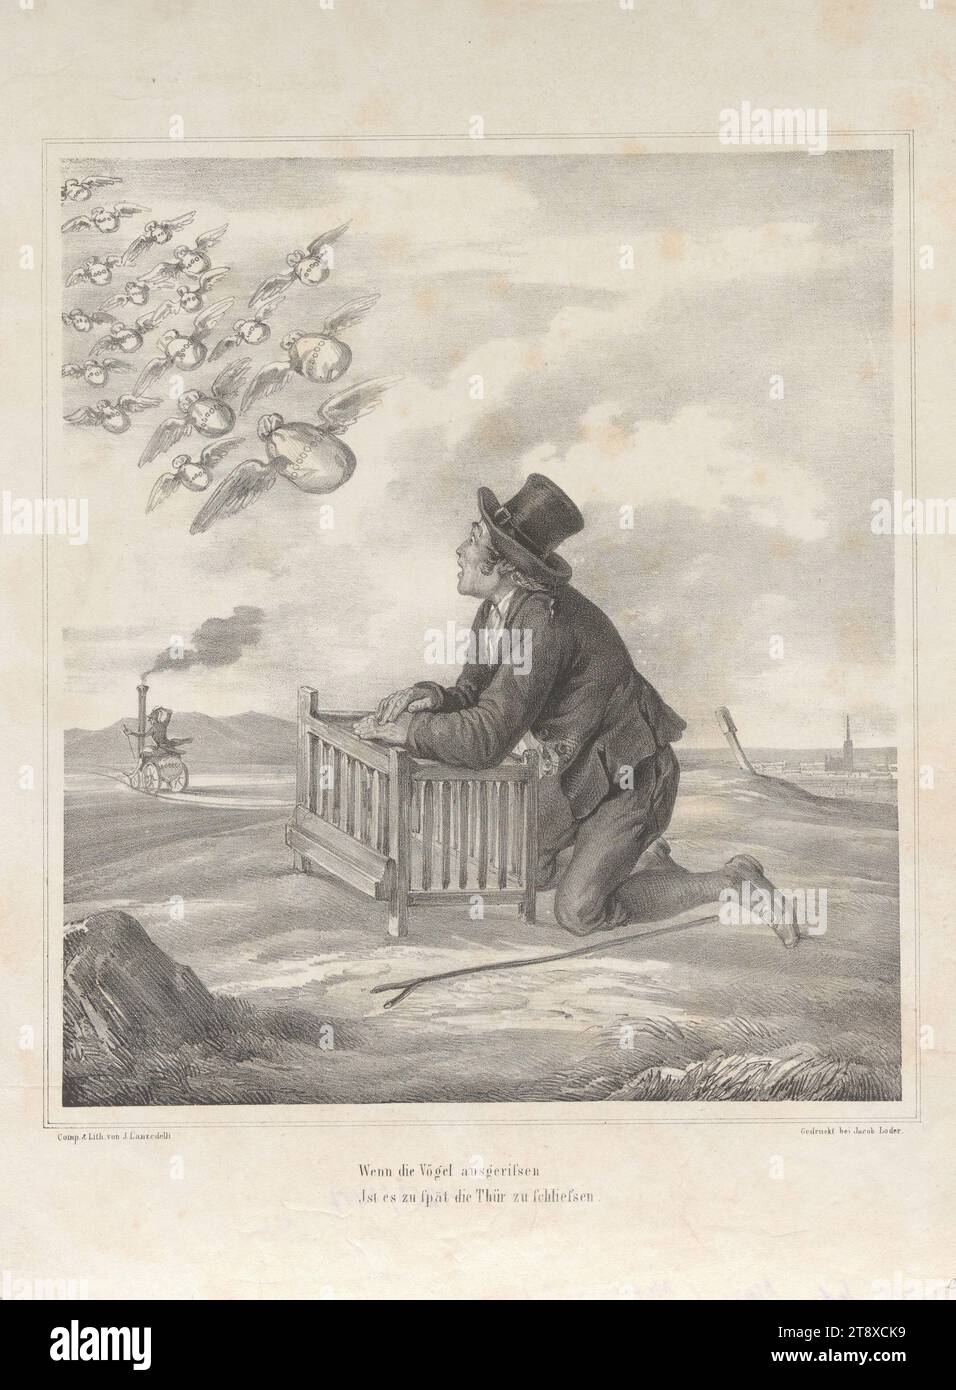 When the birds have fled, it is too late to close the door. (Satire on the flight of Metternich in March 1848), Josef the Younger Lanzedelly (Lanzedelli; Lancedelli) (1807-1879), lithographer, Jakob Loder, printer, 1848, paper, chalk lithograph, height 36.2 cm, width 26.9 cm, revolutions of 1848, 1849, caricature, satire, flight, politics, Vormärz, Biedermeier, flight, running away; persecution, politician, The Vienna Collection Stock Photo